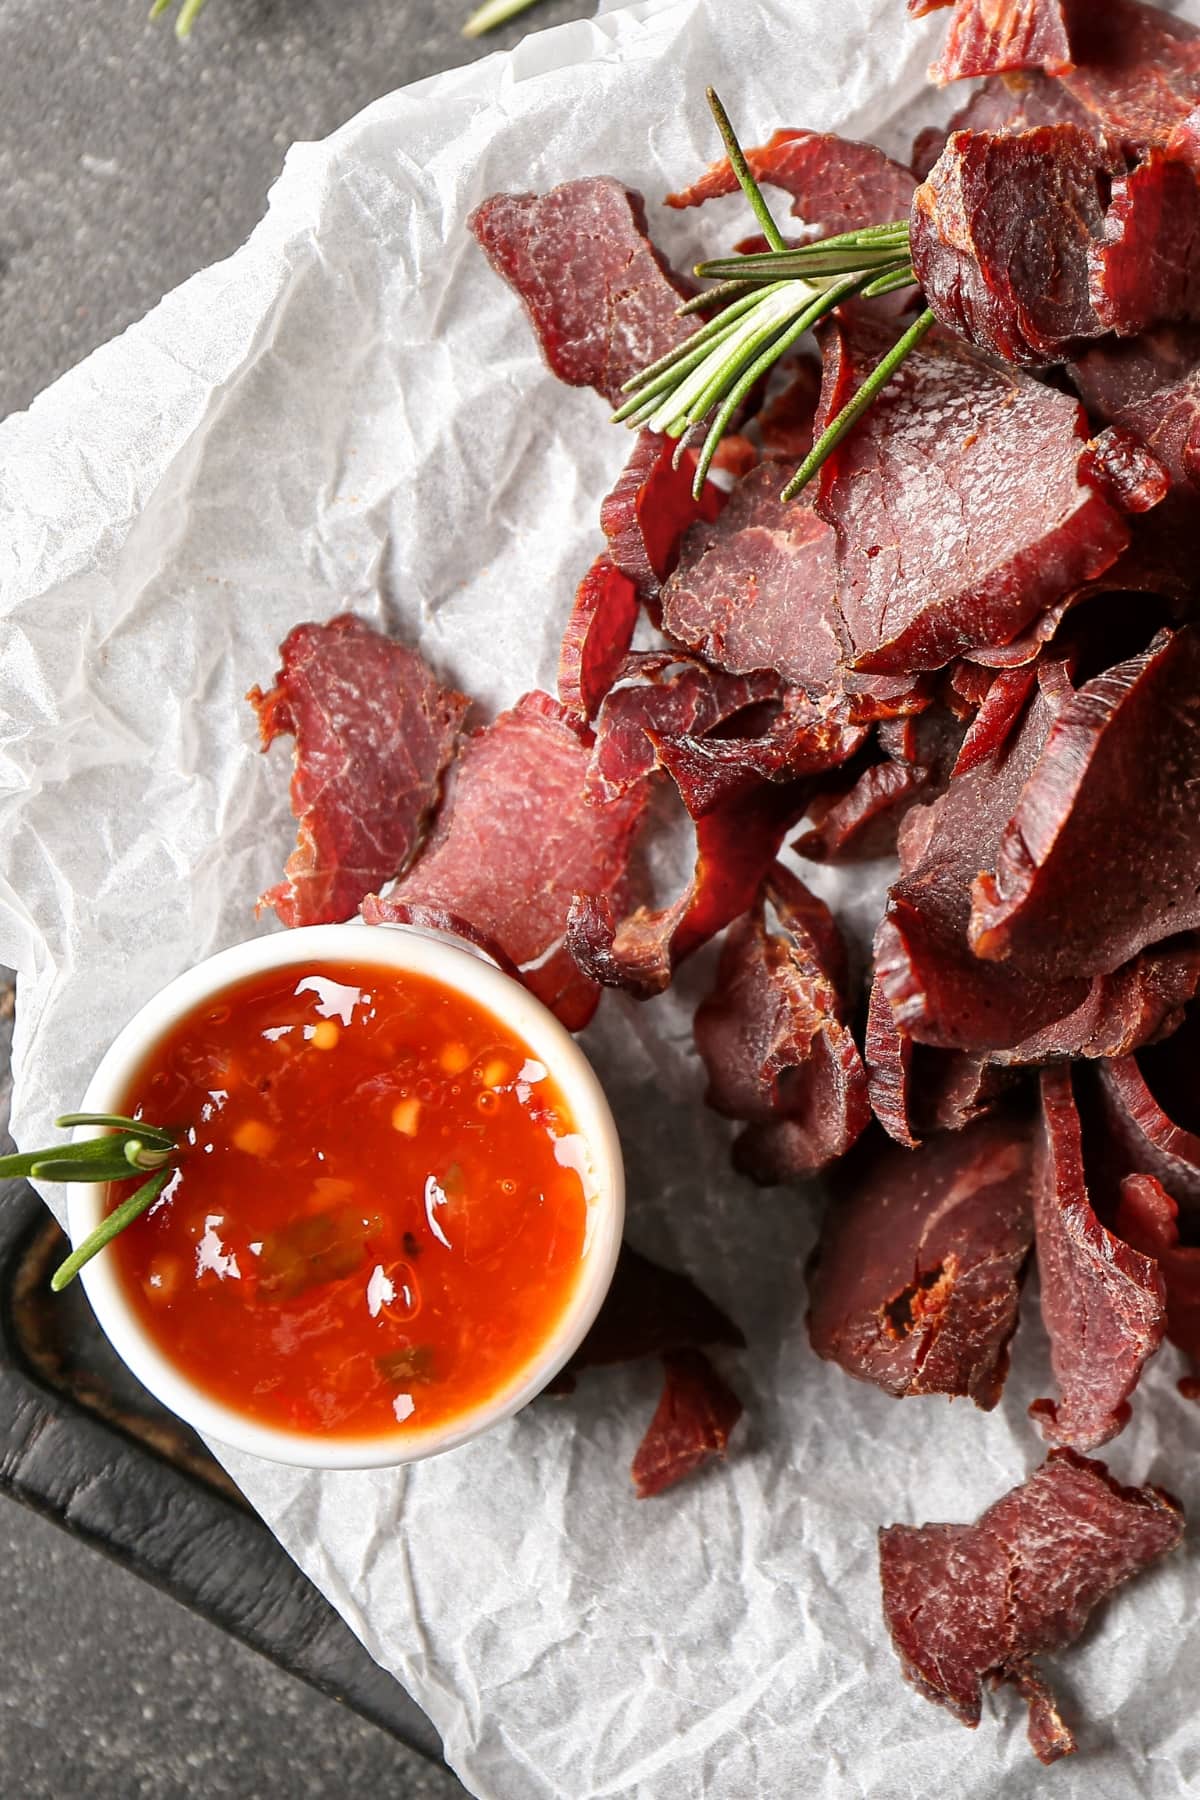 https://insanelygoodrecipes.com/wp-content/uploads/2023/09/Spicy-Beef-Jerky-with-Sauce-on-a-Parchment-Paper.jpg